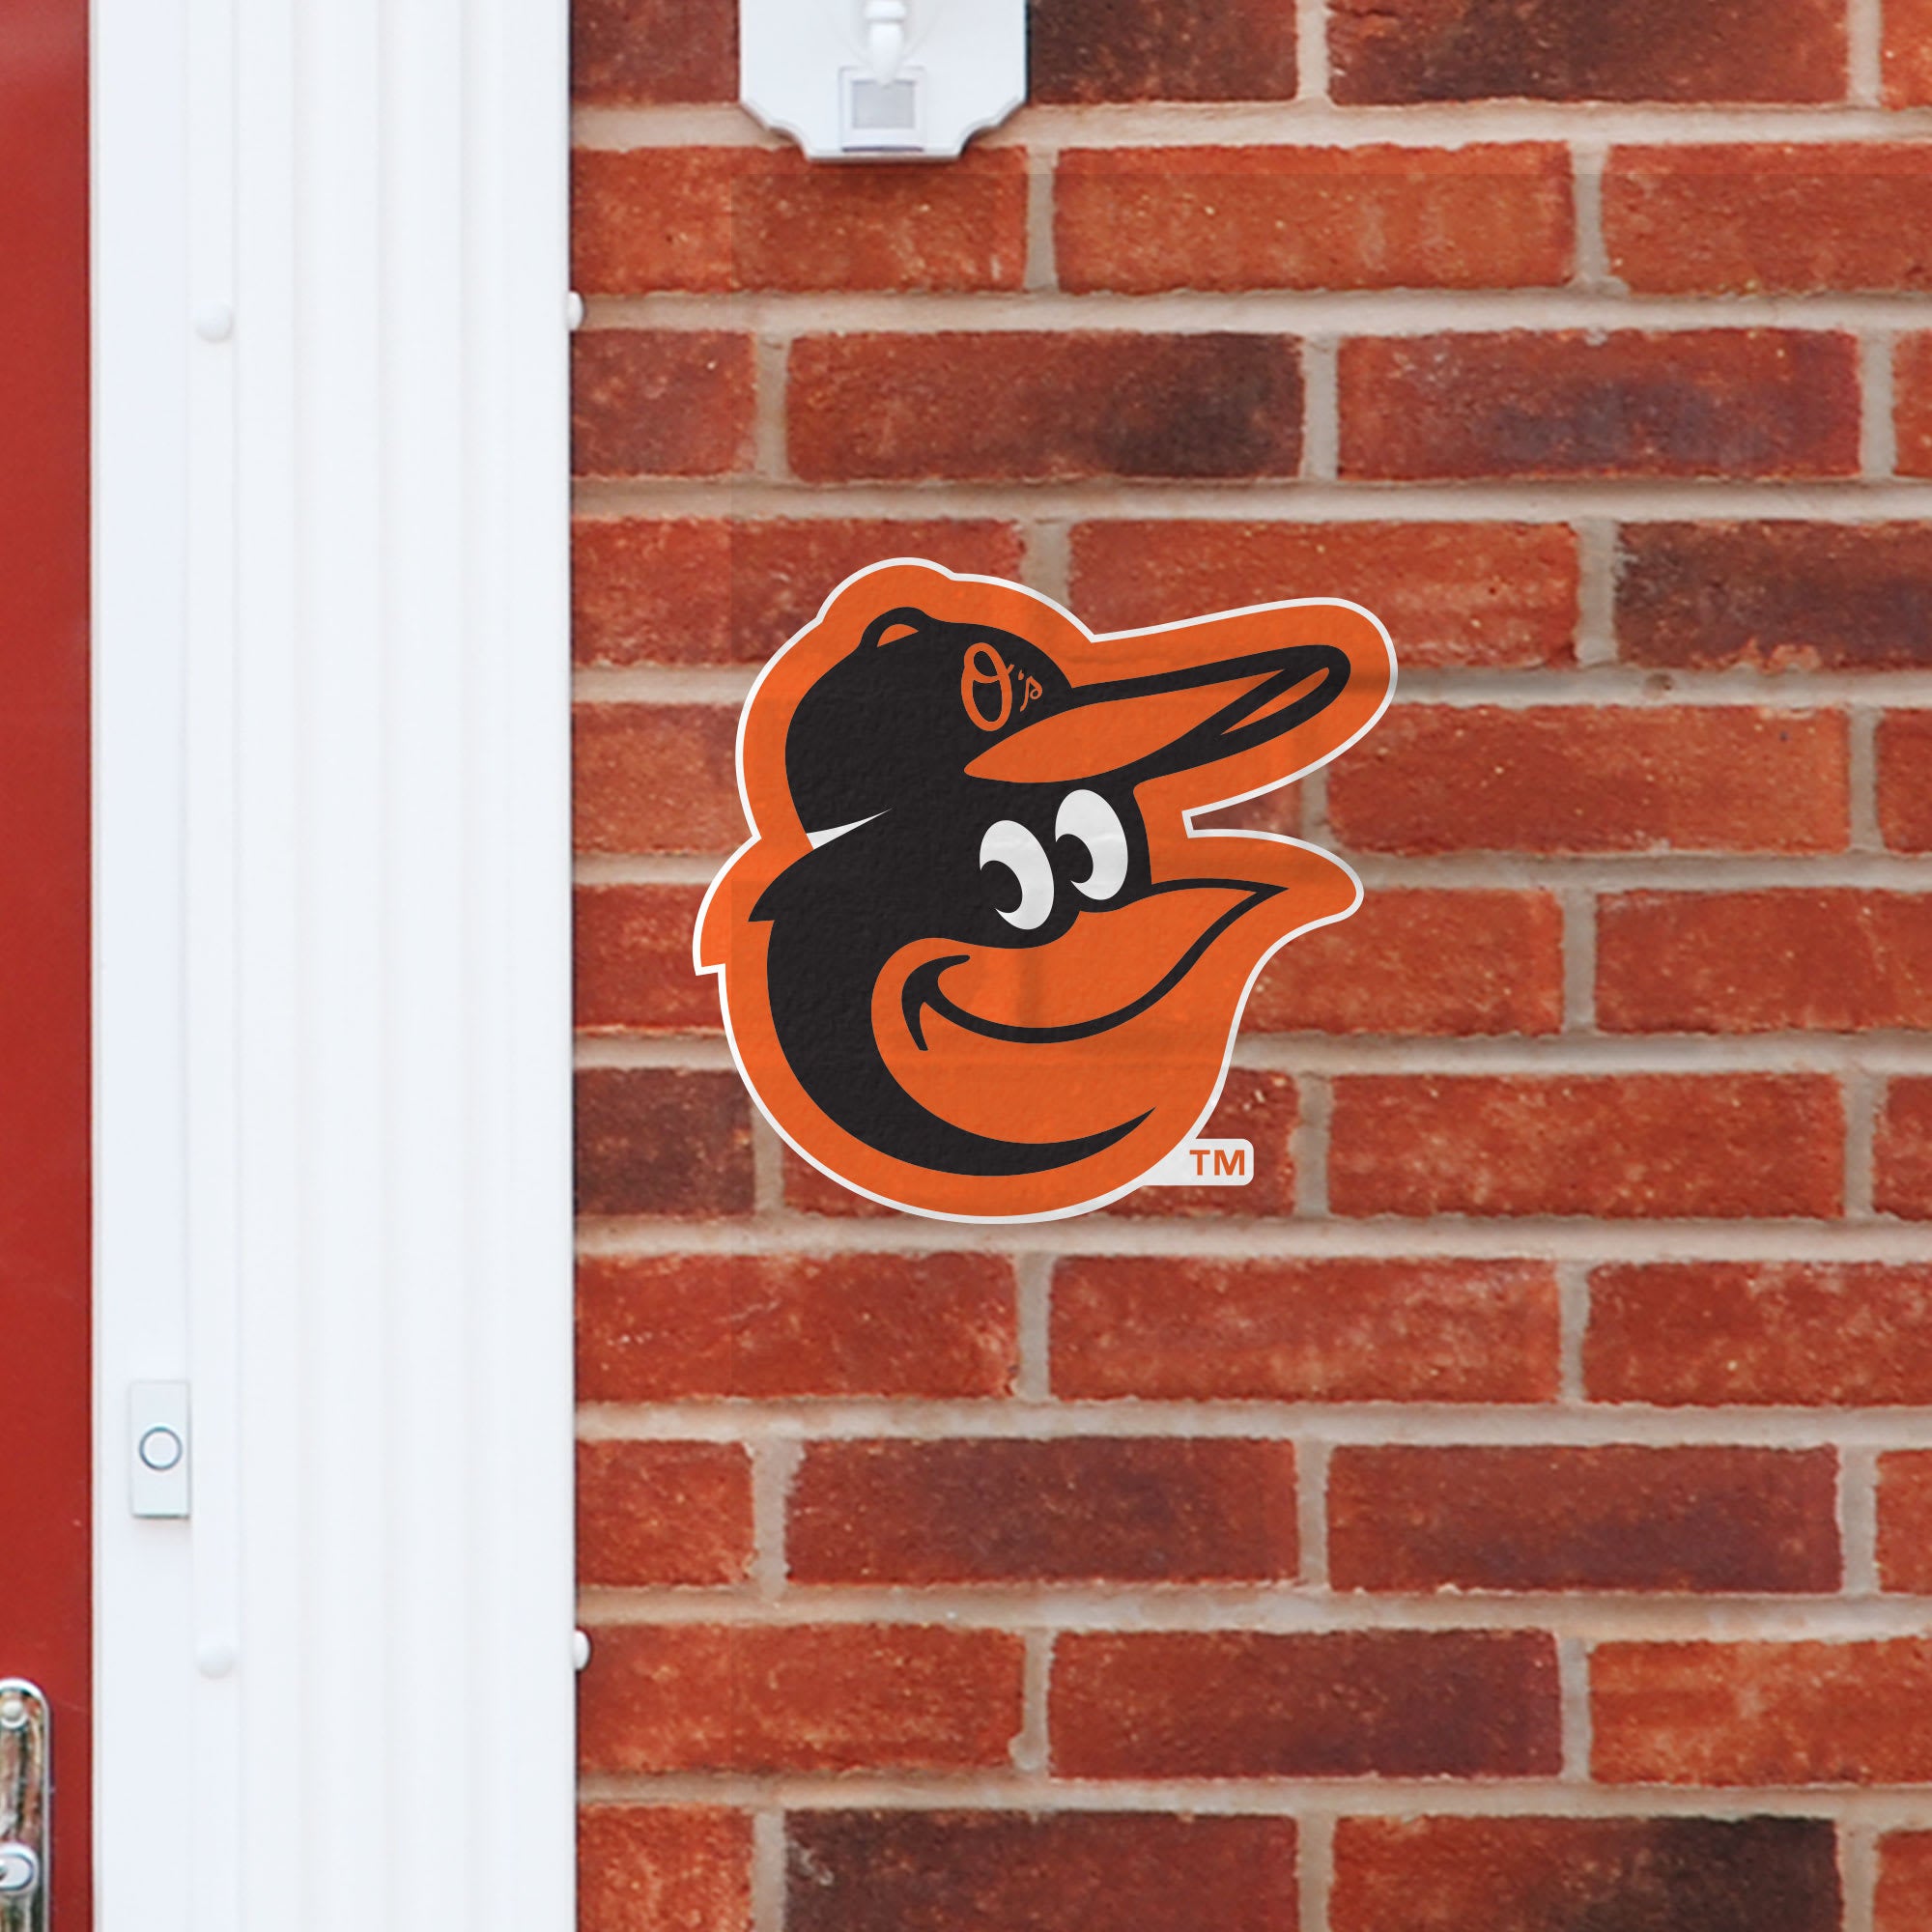 Baltimore Orioles: Logo - Officially Licensed MLB Outdoor Graphic Large by Fathead | Wood/Aluminum